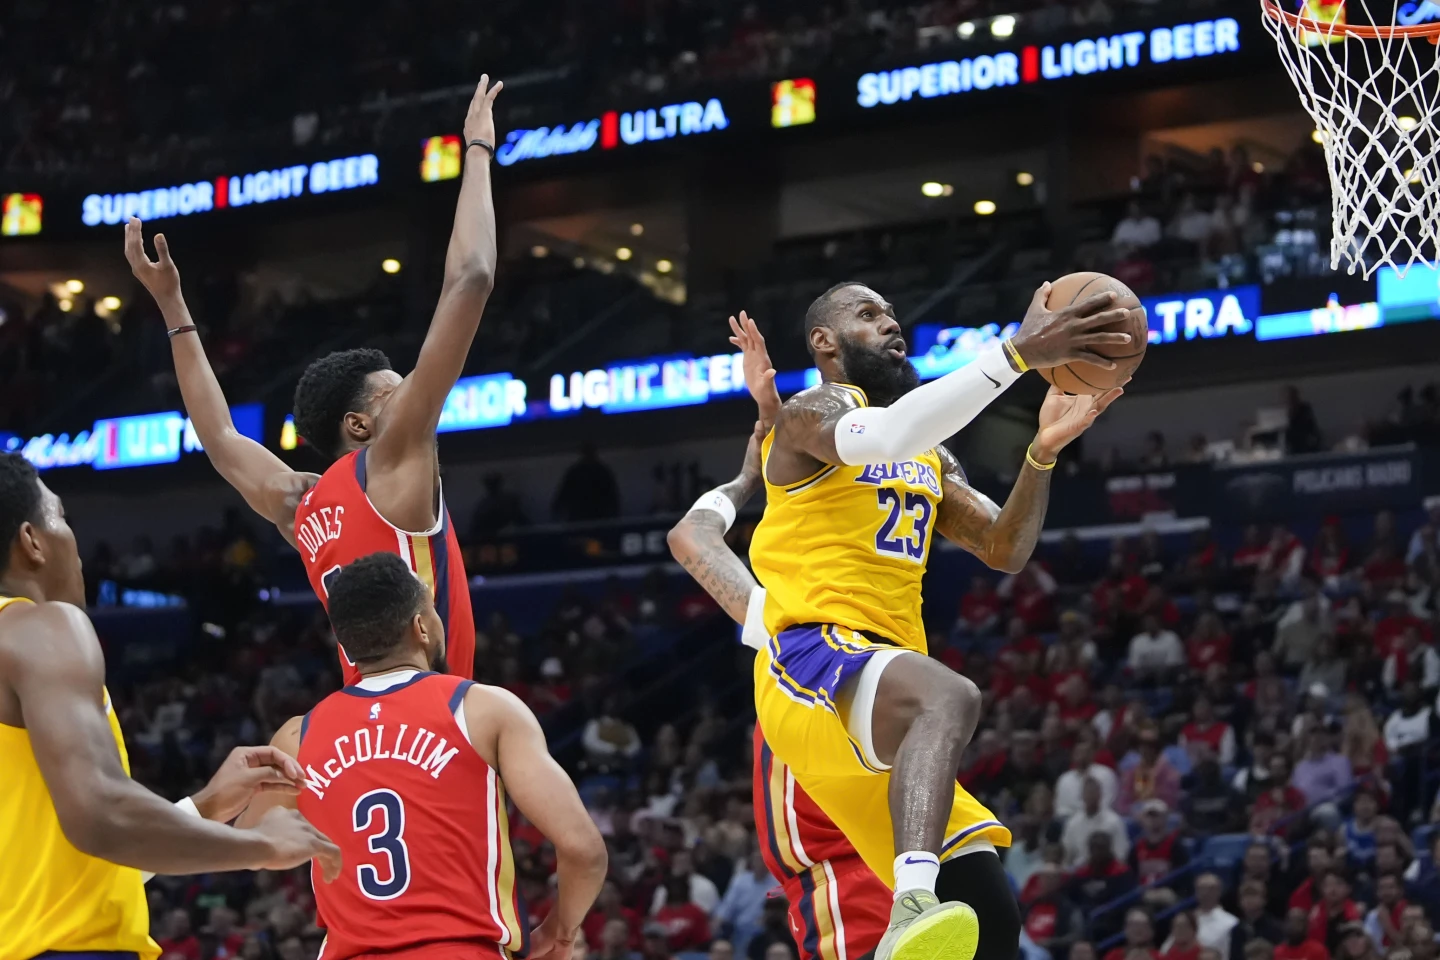 Lakers aseguran playoffs. LeBron James lidera triunfo ante New Orleans